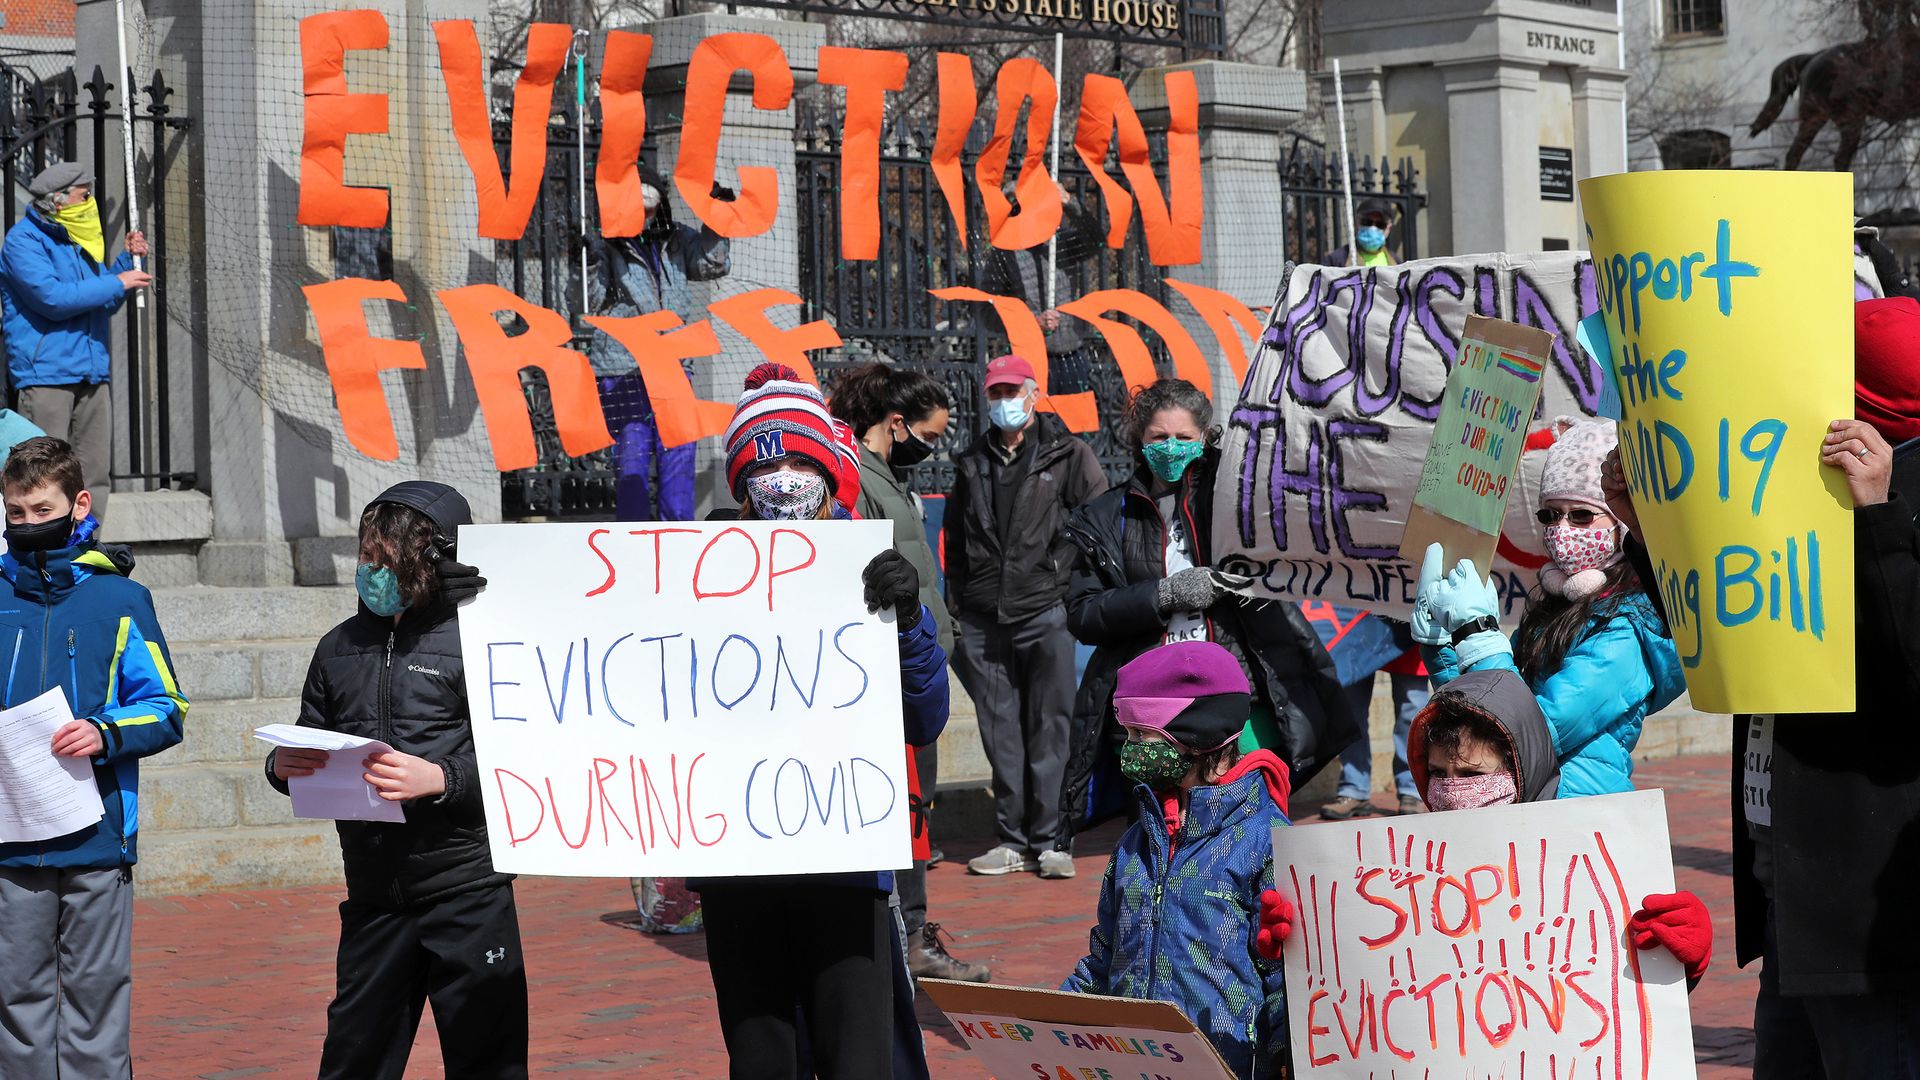 Picture of people holding signs during a protest to support stopping evictions during covid